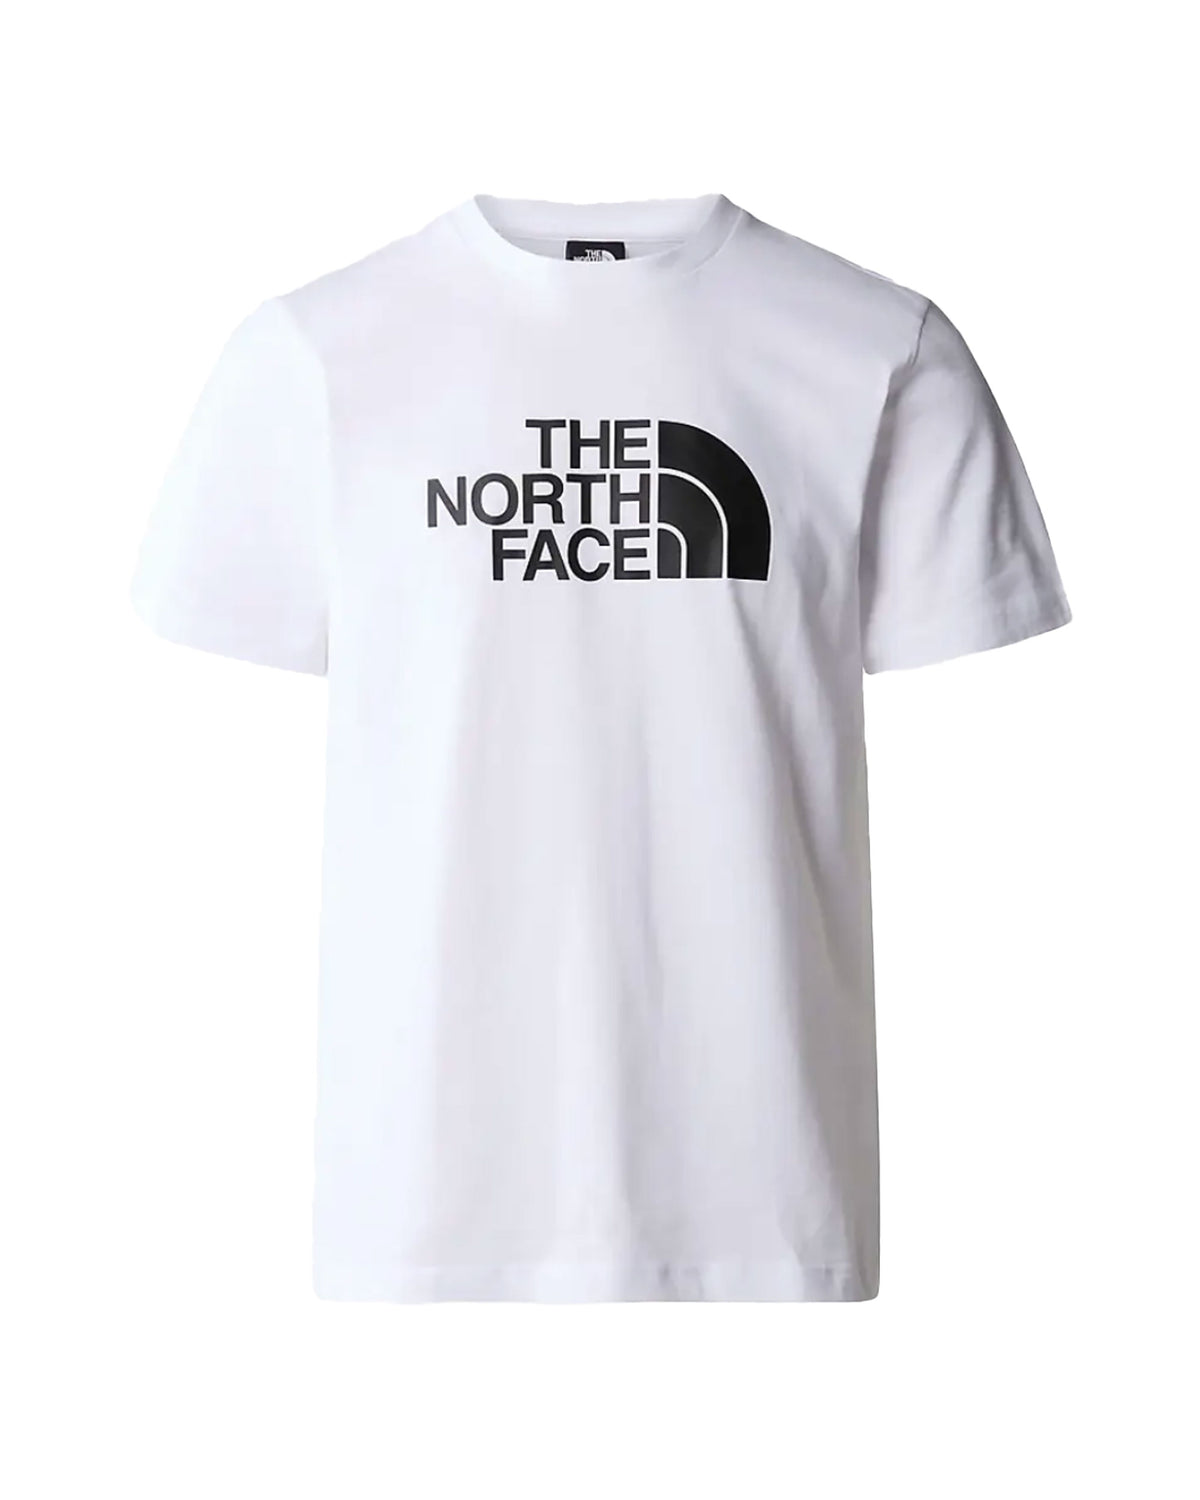 T-Shirt Uomo The North Face Easy Bianco